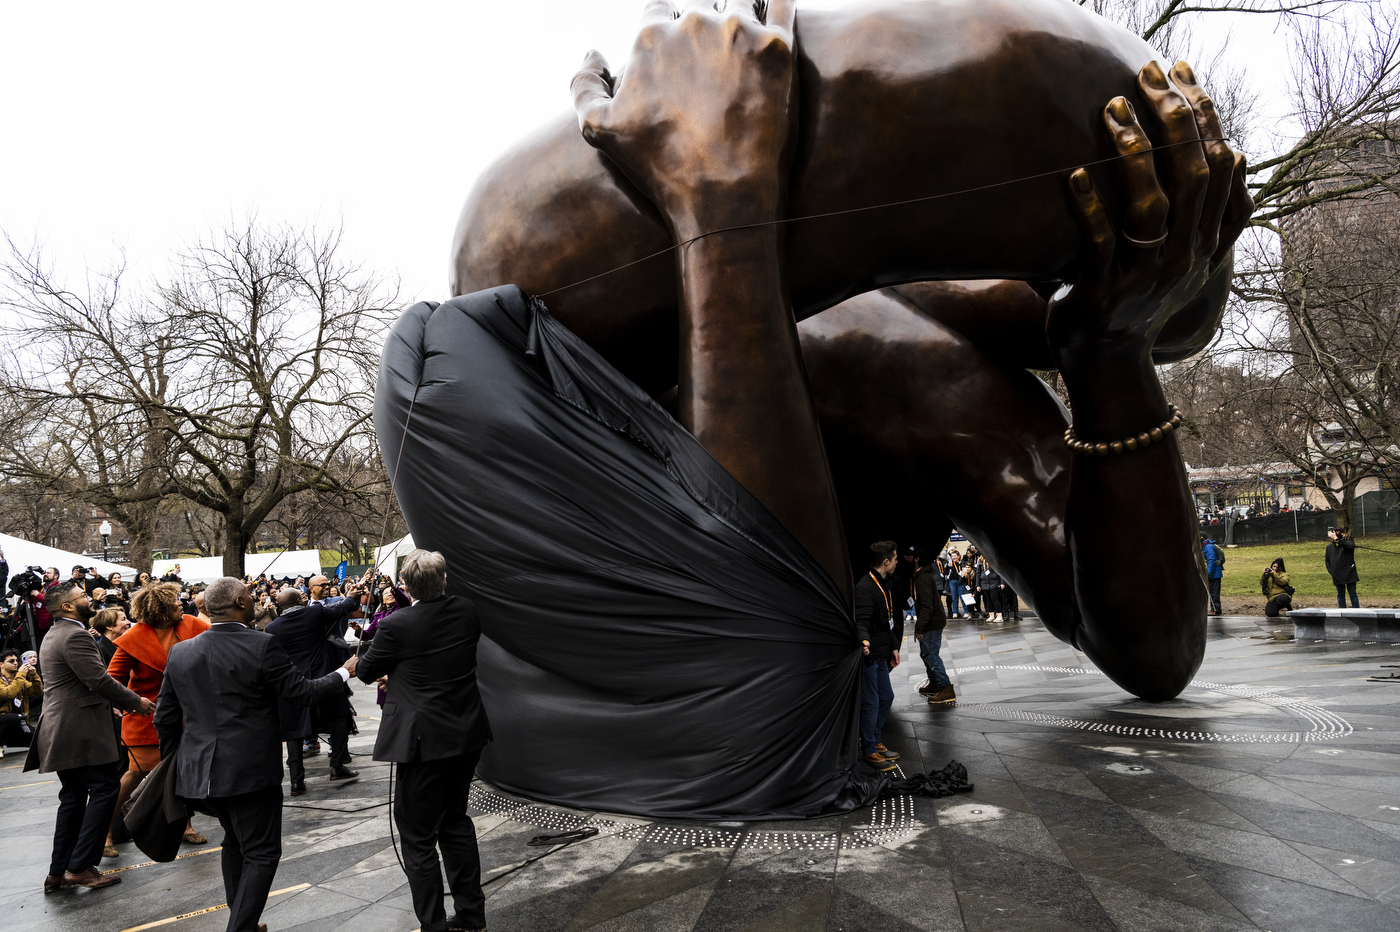 several people pull a black tarp down to reveal the embrace statue